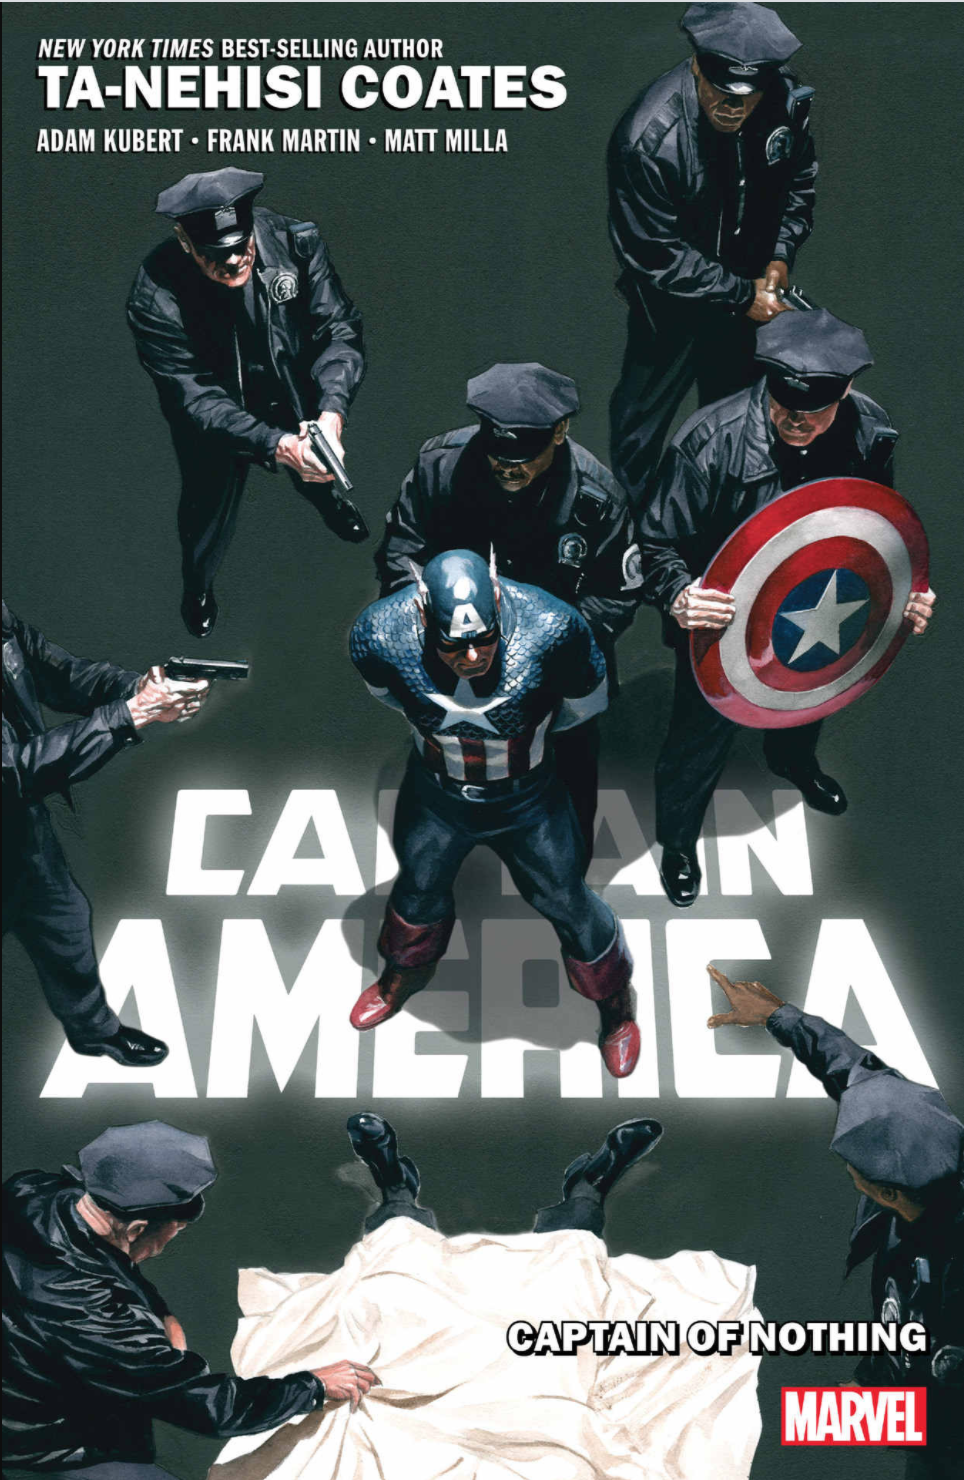 Captain America Vol. 2: Captain Of Nothing